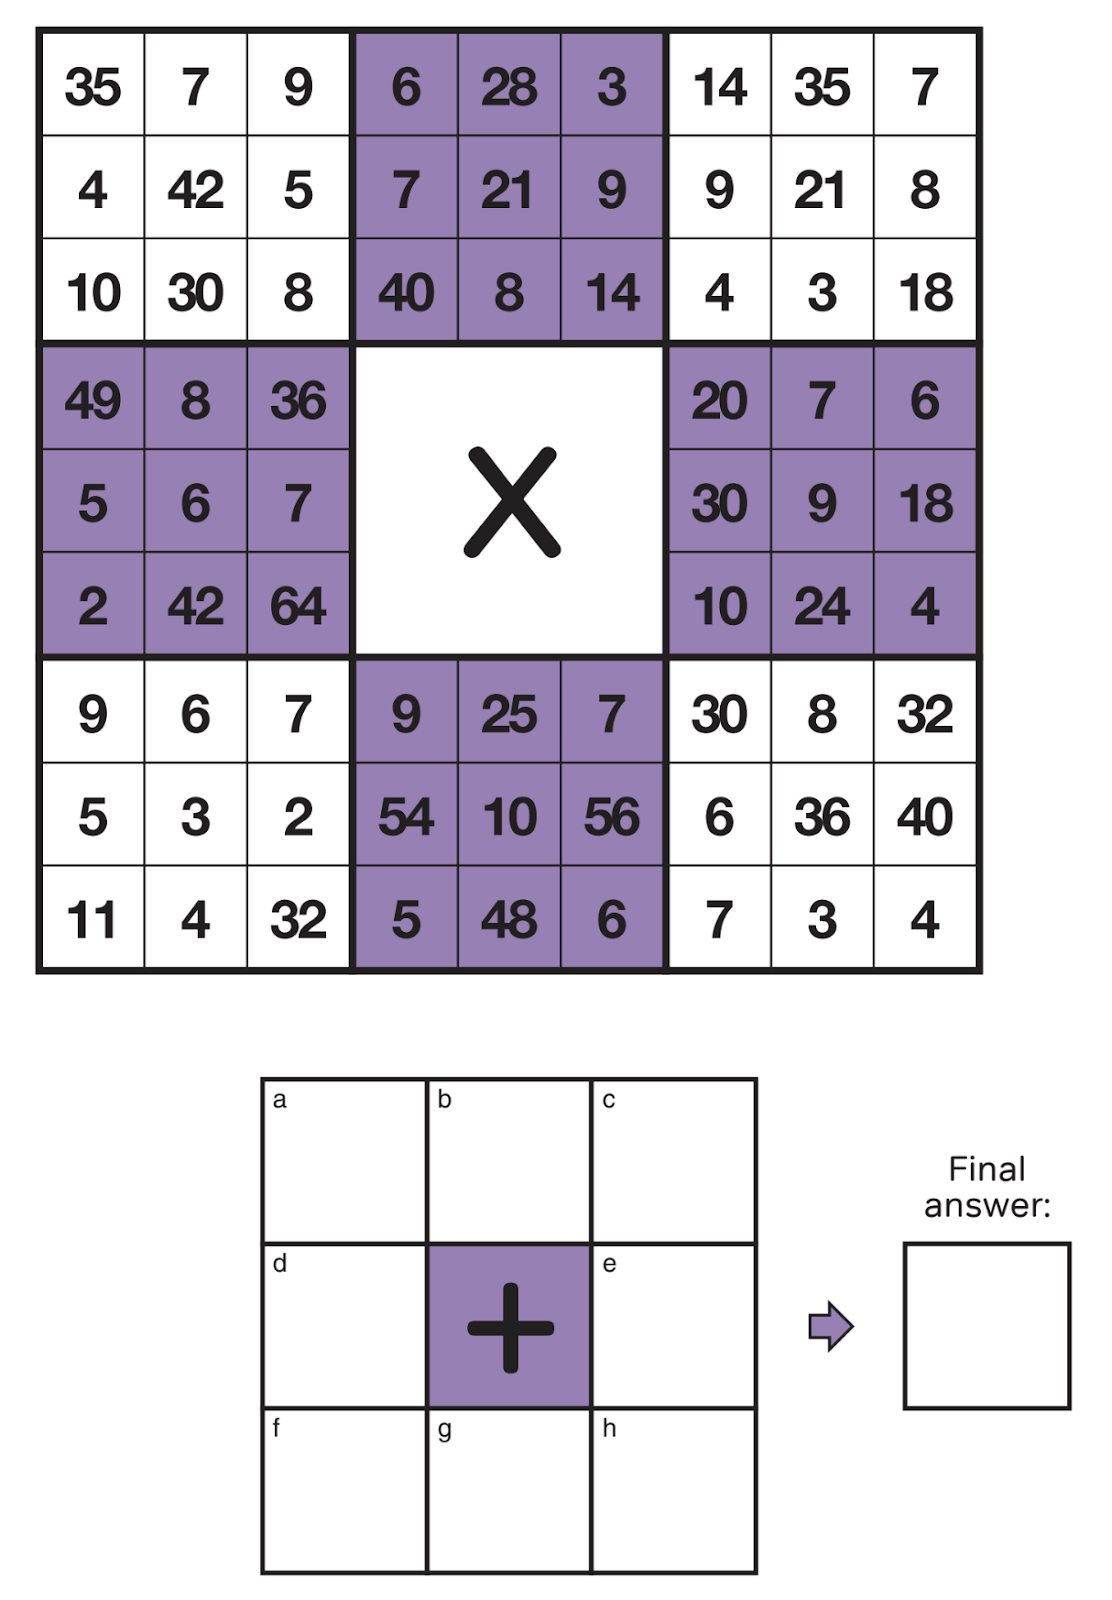 An unsolved two part kakooma puzzle, with each part made up of 9 connected squares. The first part has eight 3-by-3 square sections containing 9 numbers each. The top-left section contains 35, 7, 9ths , 4, 42, 5, 10, 30, and 8. The top-middle section contains 6, 28, 3, 7, 21, 9, 40, 8, and 14. The top-right section contains 14, 35, 7, 9, 21, 8, 4, 3, and 18. The middle-left section contains 49, 8, 36, 5, 6, 7, 2, 42, and 64. The middle-right section contains 20, 7, 6, 30, 9, 18, 10, 24, and 4. The bottom-left section contains 9, 6, 7, 5, 3, 2, 11, 4, and 32. The bottom-middle section contains 9, 25, 7, 54, 10, 56, 5, 48, and 6. The bottom-left section contains 30, 8, 32, 6, 36, 40, 7, 3, and 4. The second part has 8 smaller, blank connected squares surrounding the addition symbol, labelled a-h, followed by an arrow pointing to the final answer box.